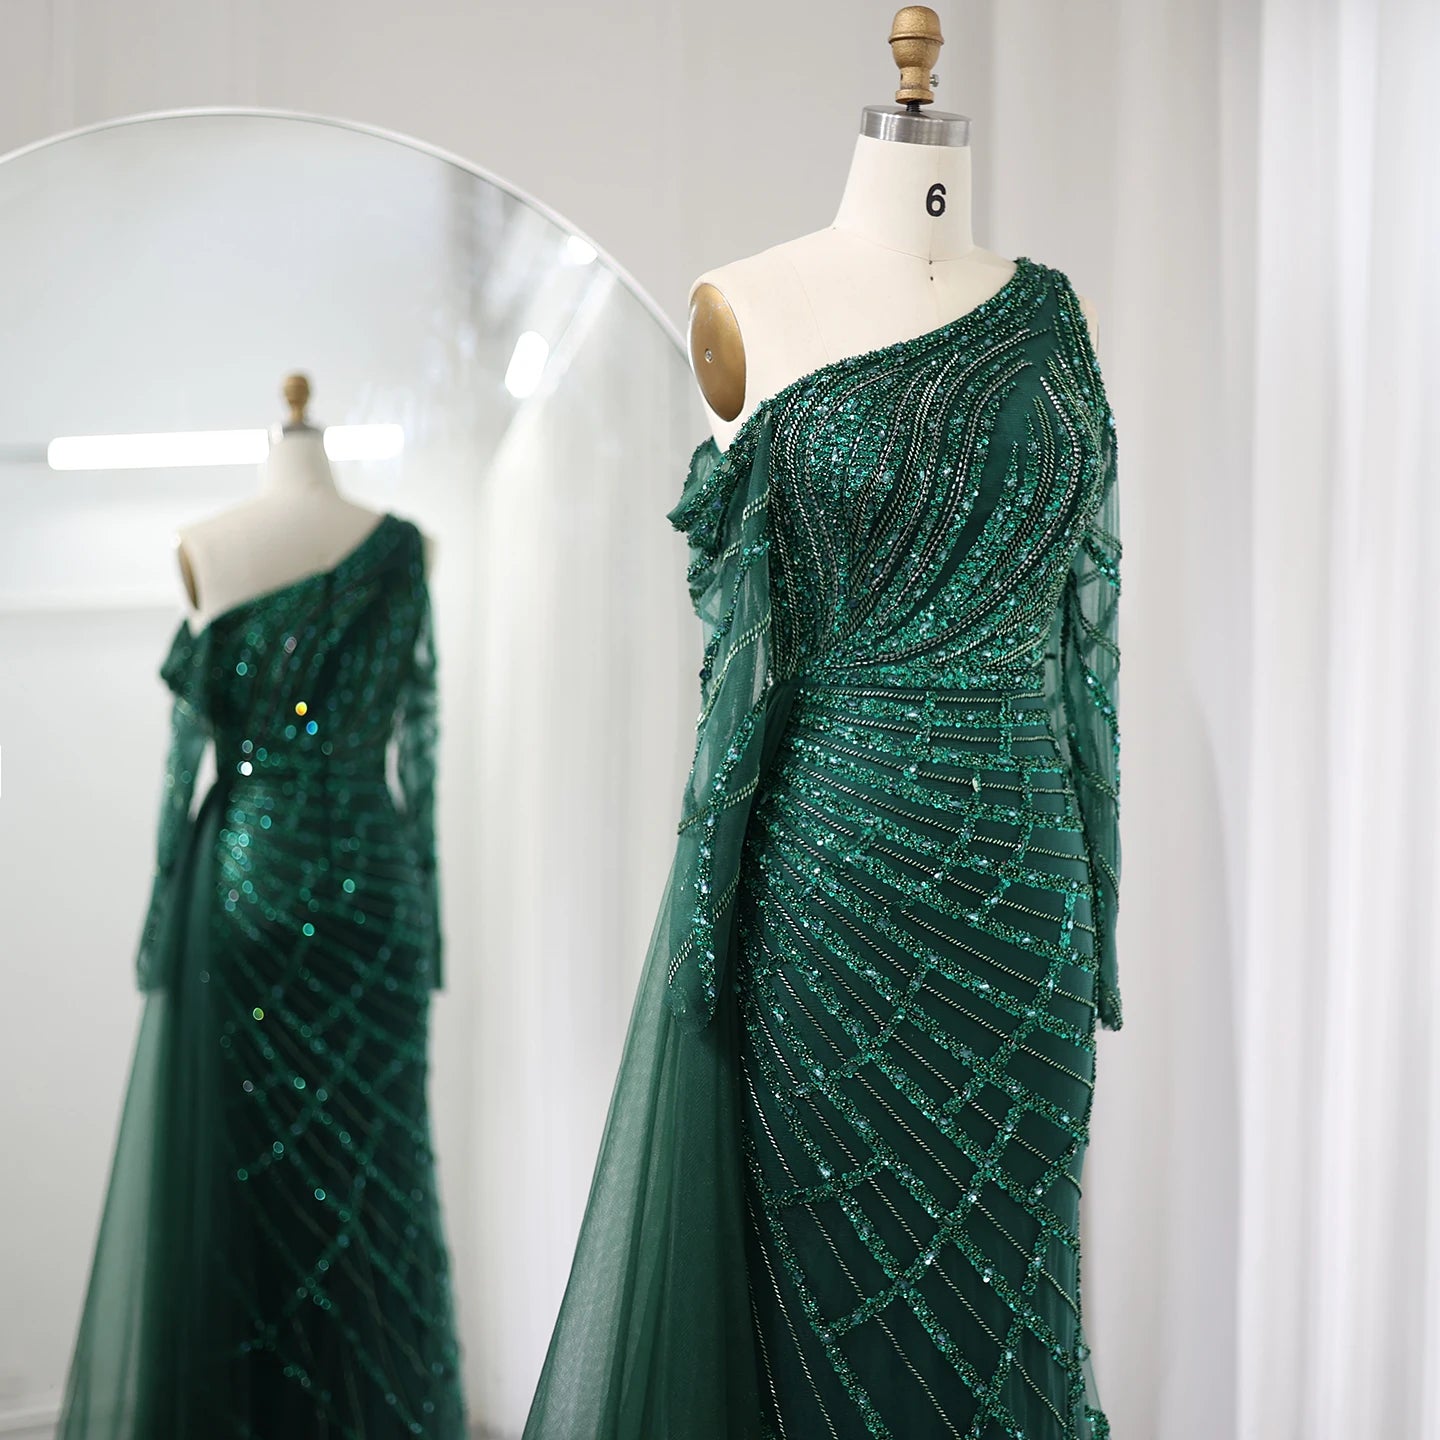 UU-Sharon Said Emerald Green One Shoulder Mermaid Evening Dress with Overskirt Long Sleeves Luxury Dubai Wedding Party Gowns